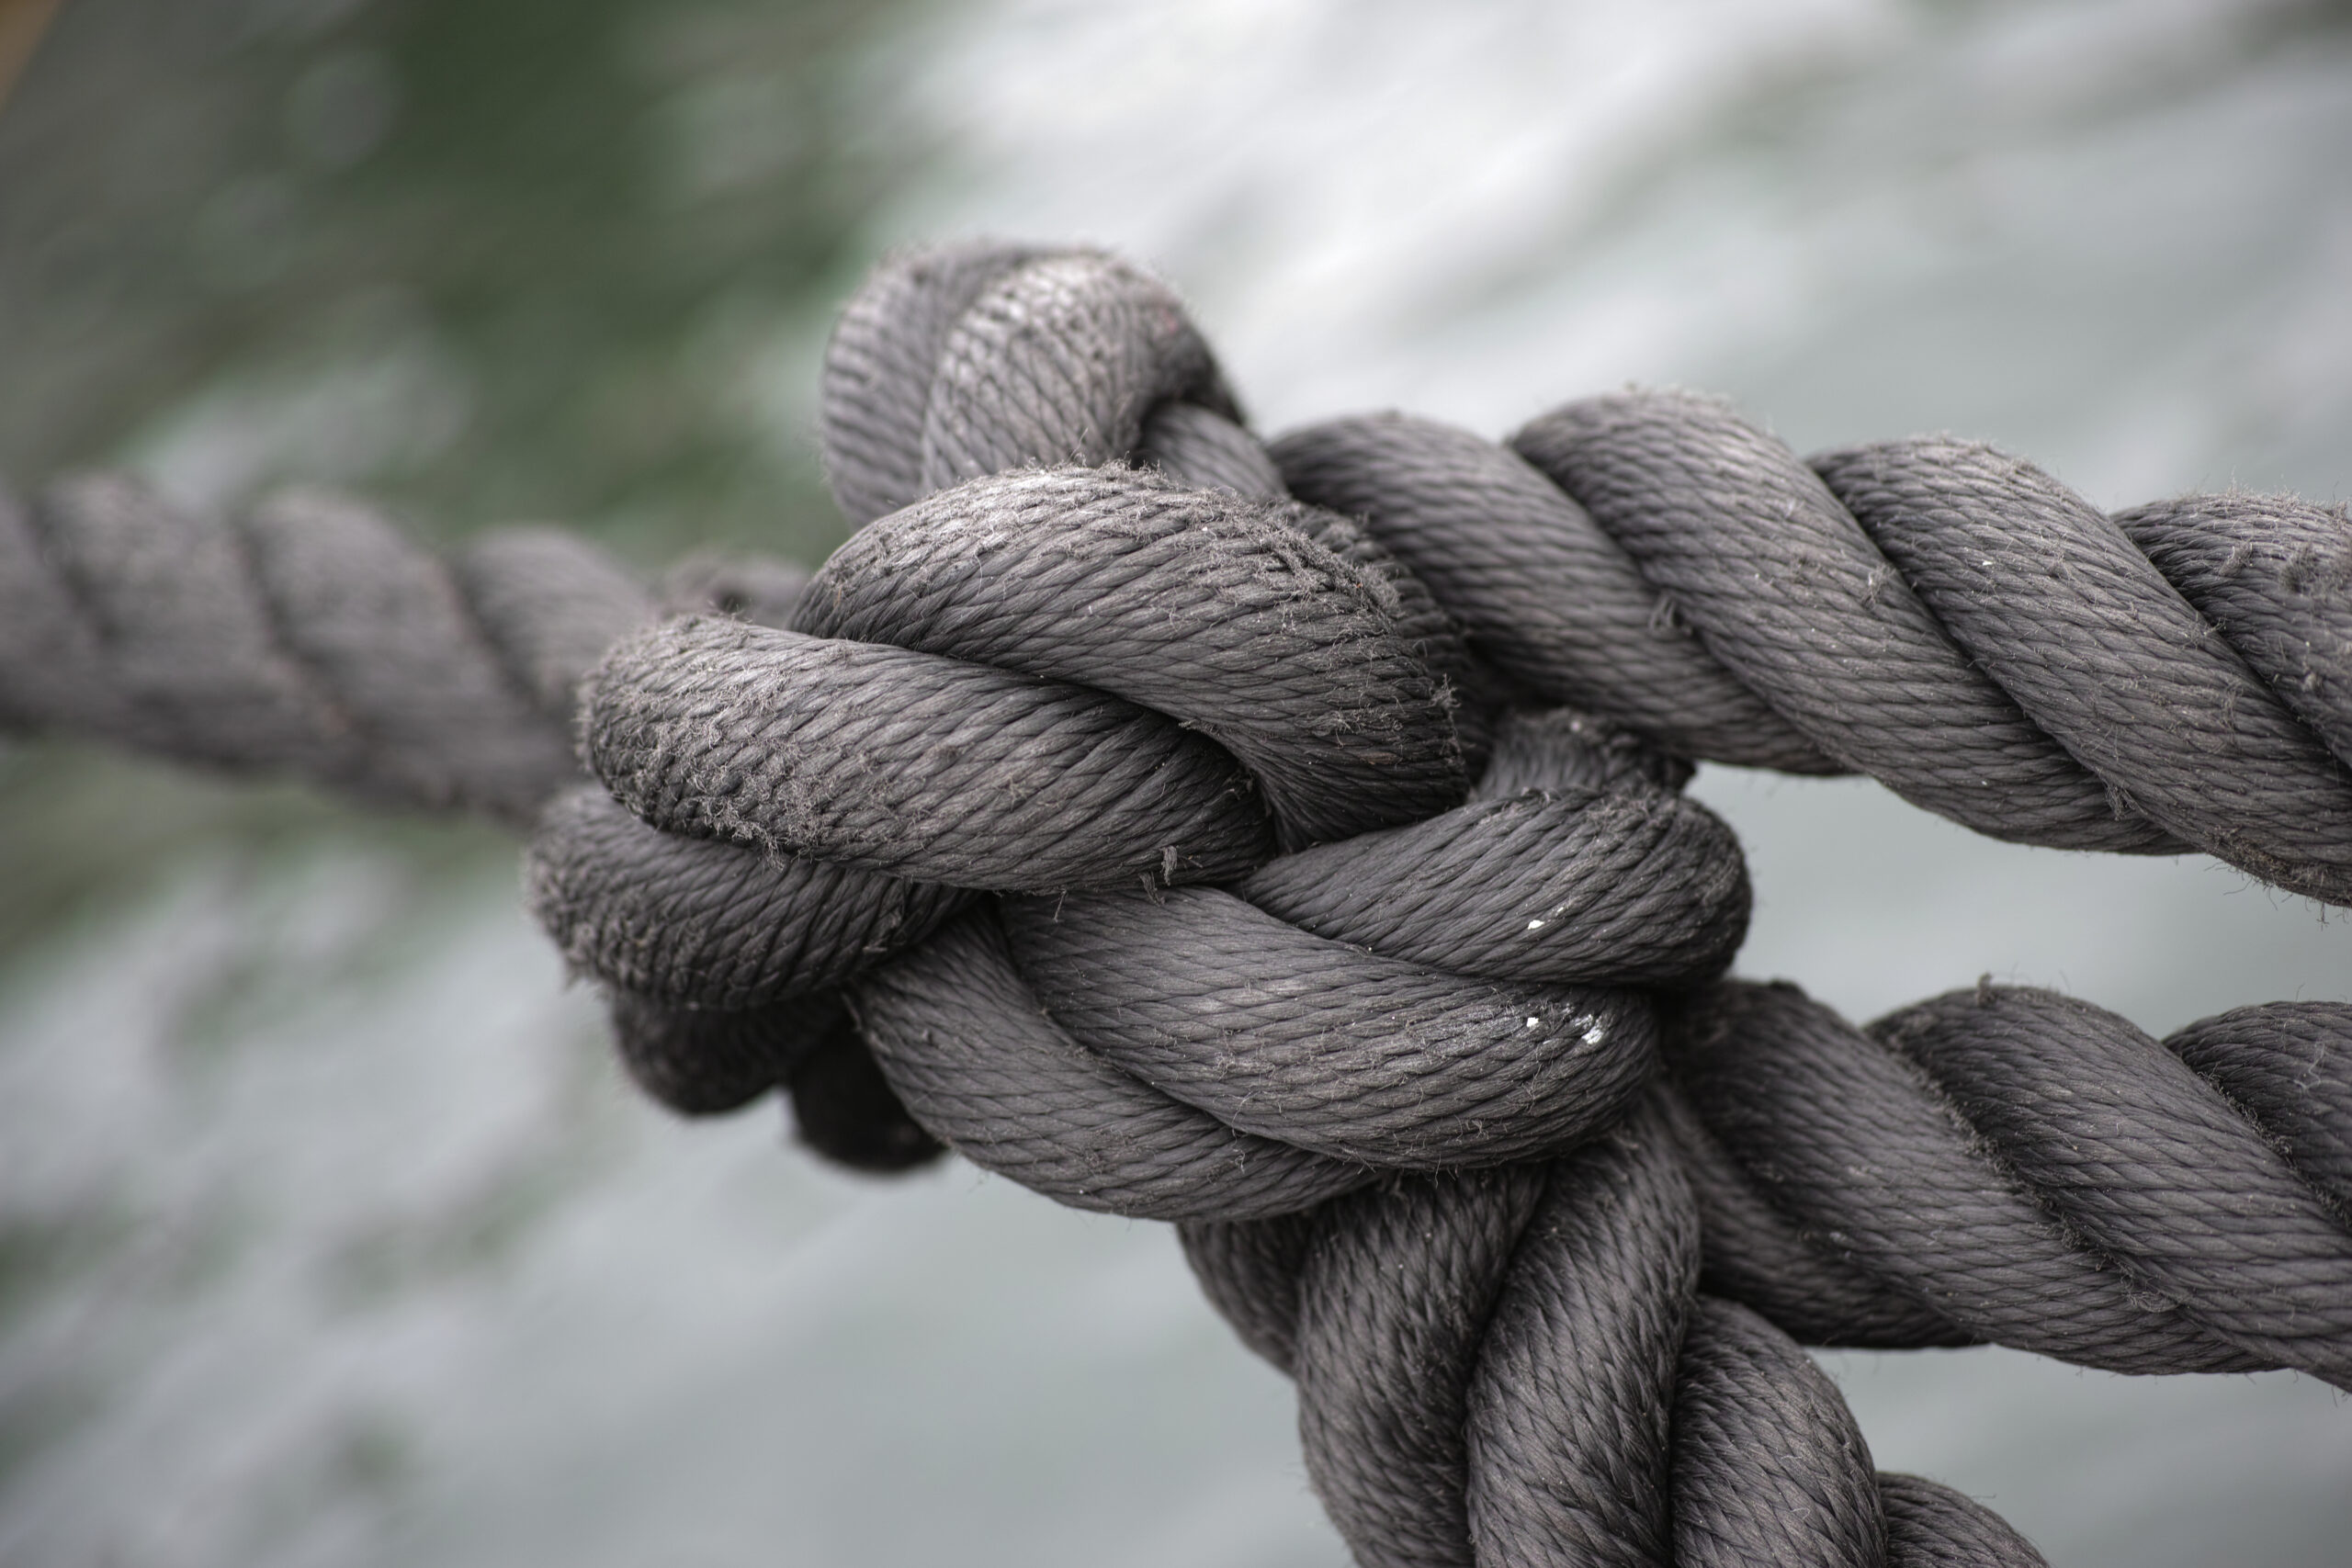 A close-up photo of a completed rappel anchor, highlighting the different pieces of gear used to ensure a safe and secure anchor, including slings, carabiners, and webbing.